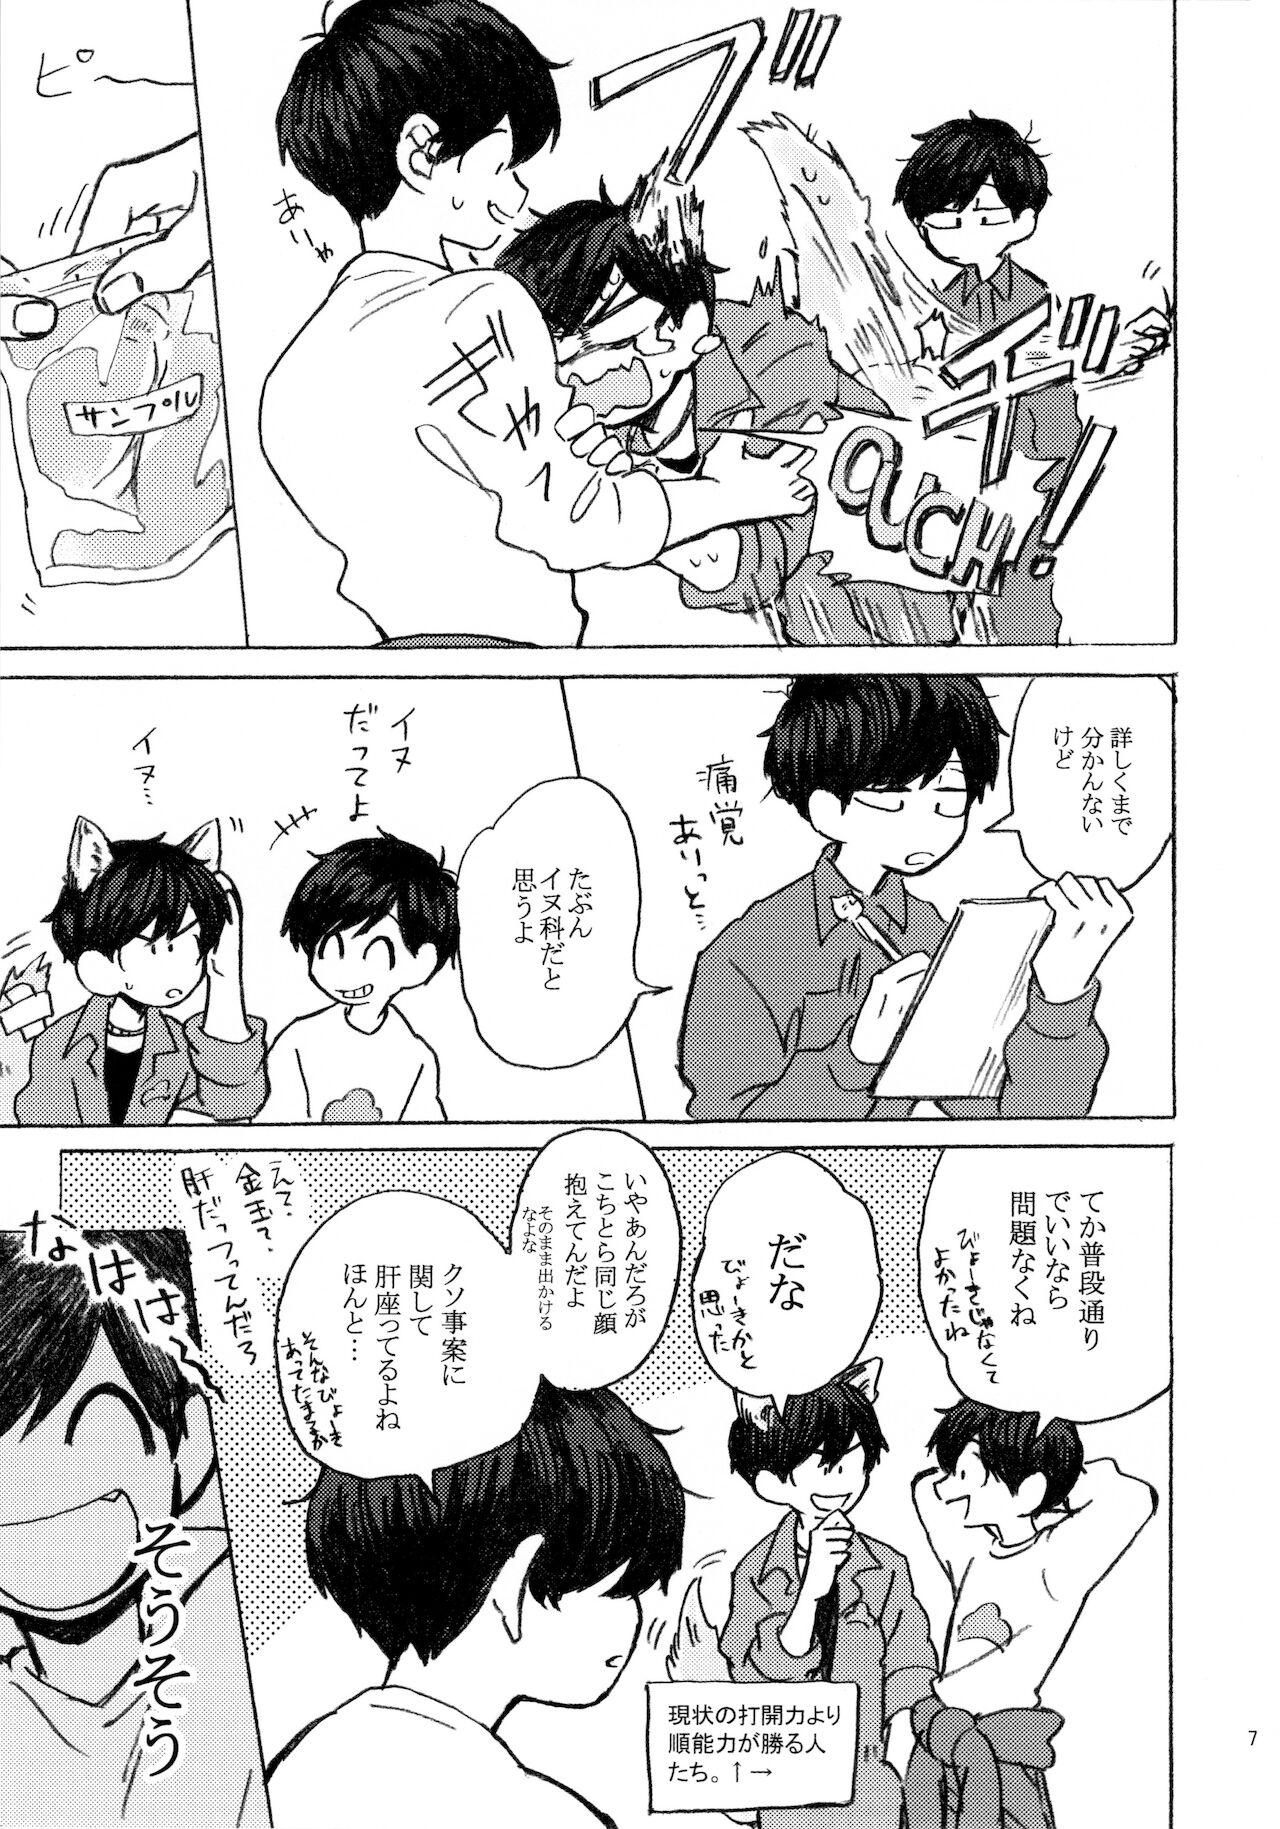 Audition PLEASE WAG YOUR TAIL ONLY TO ME. - Osomatsu-san Gay Physicals - Page 8